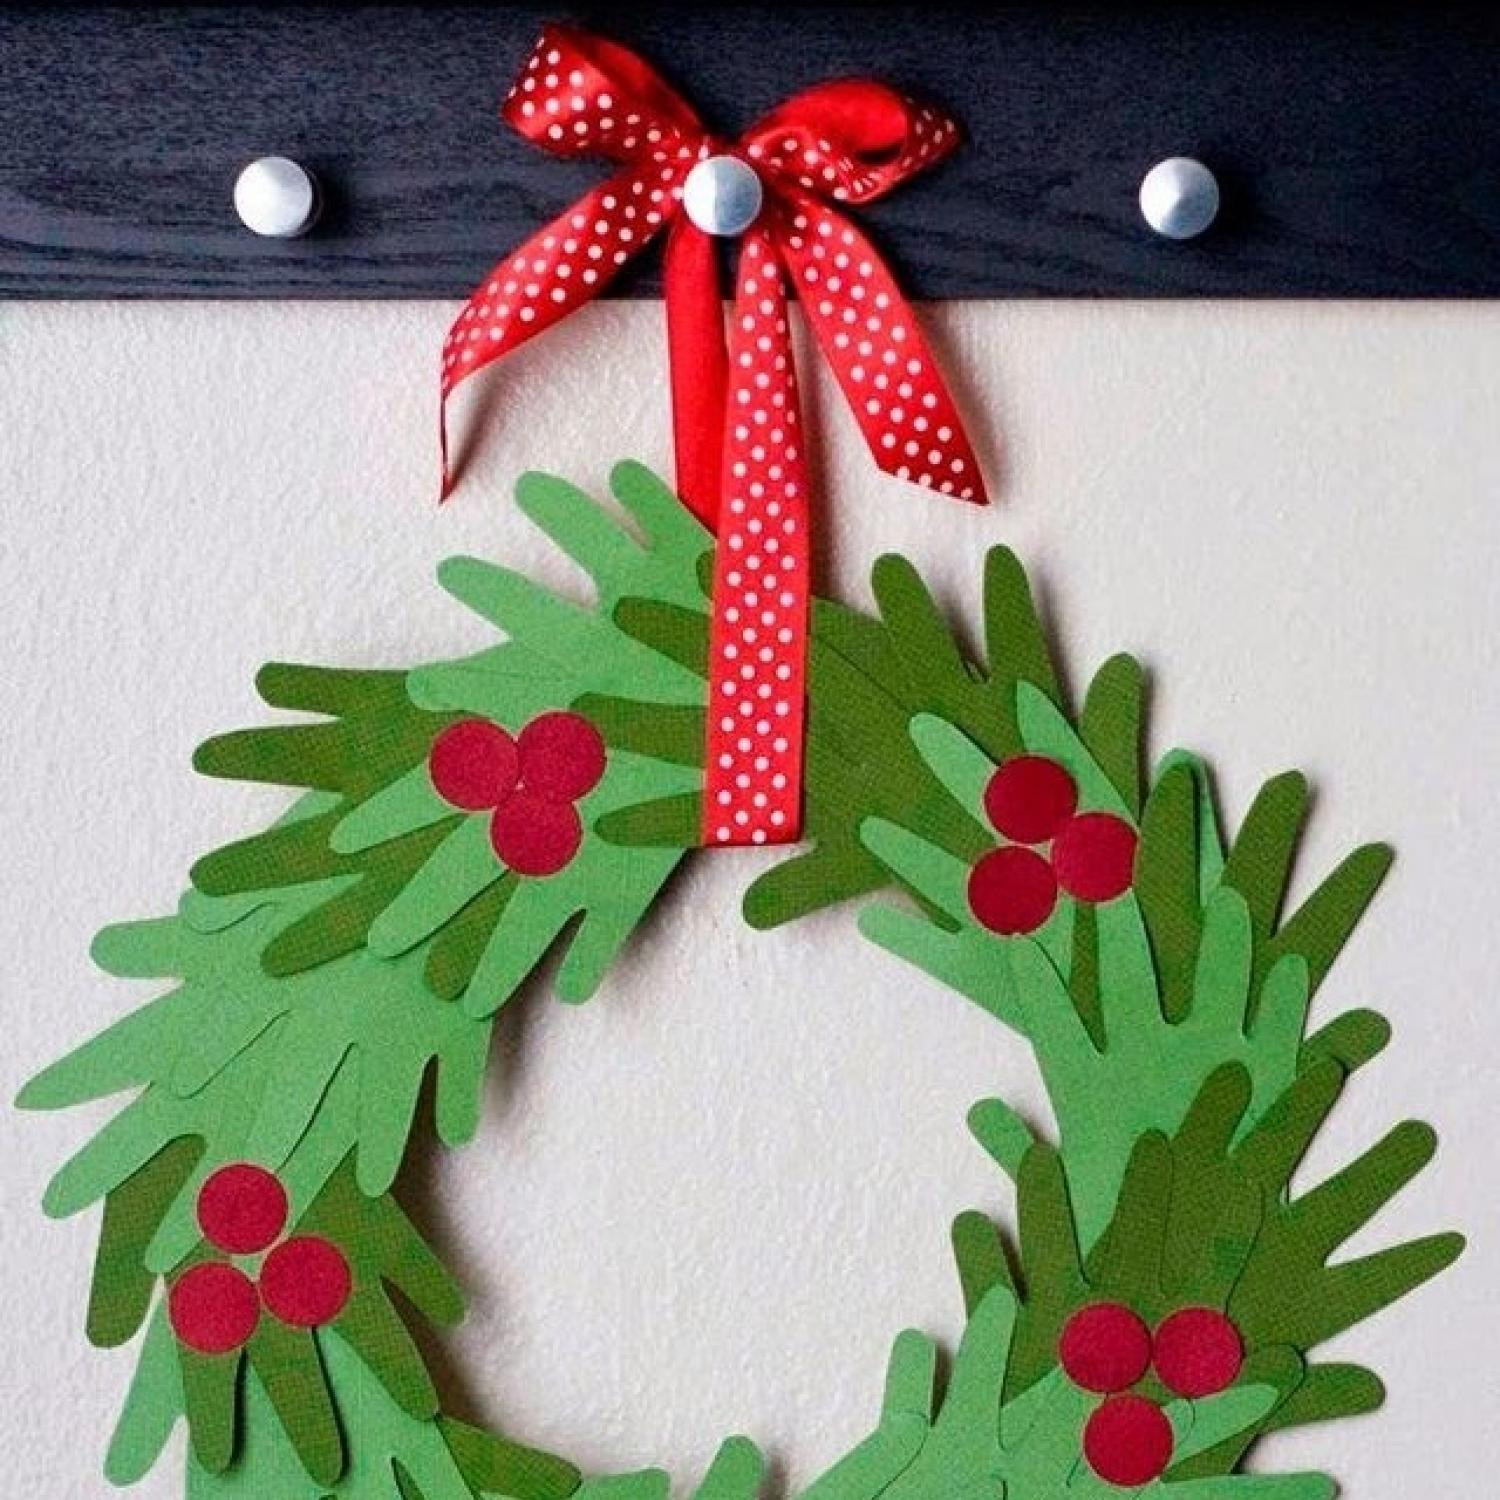 Holiday Projects For Kids
 10 Handprint Christmas Crafts for Kids